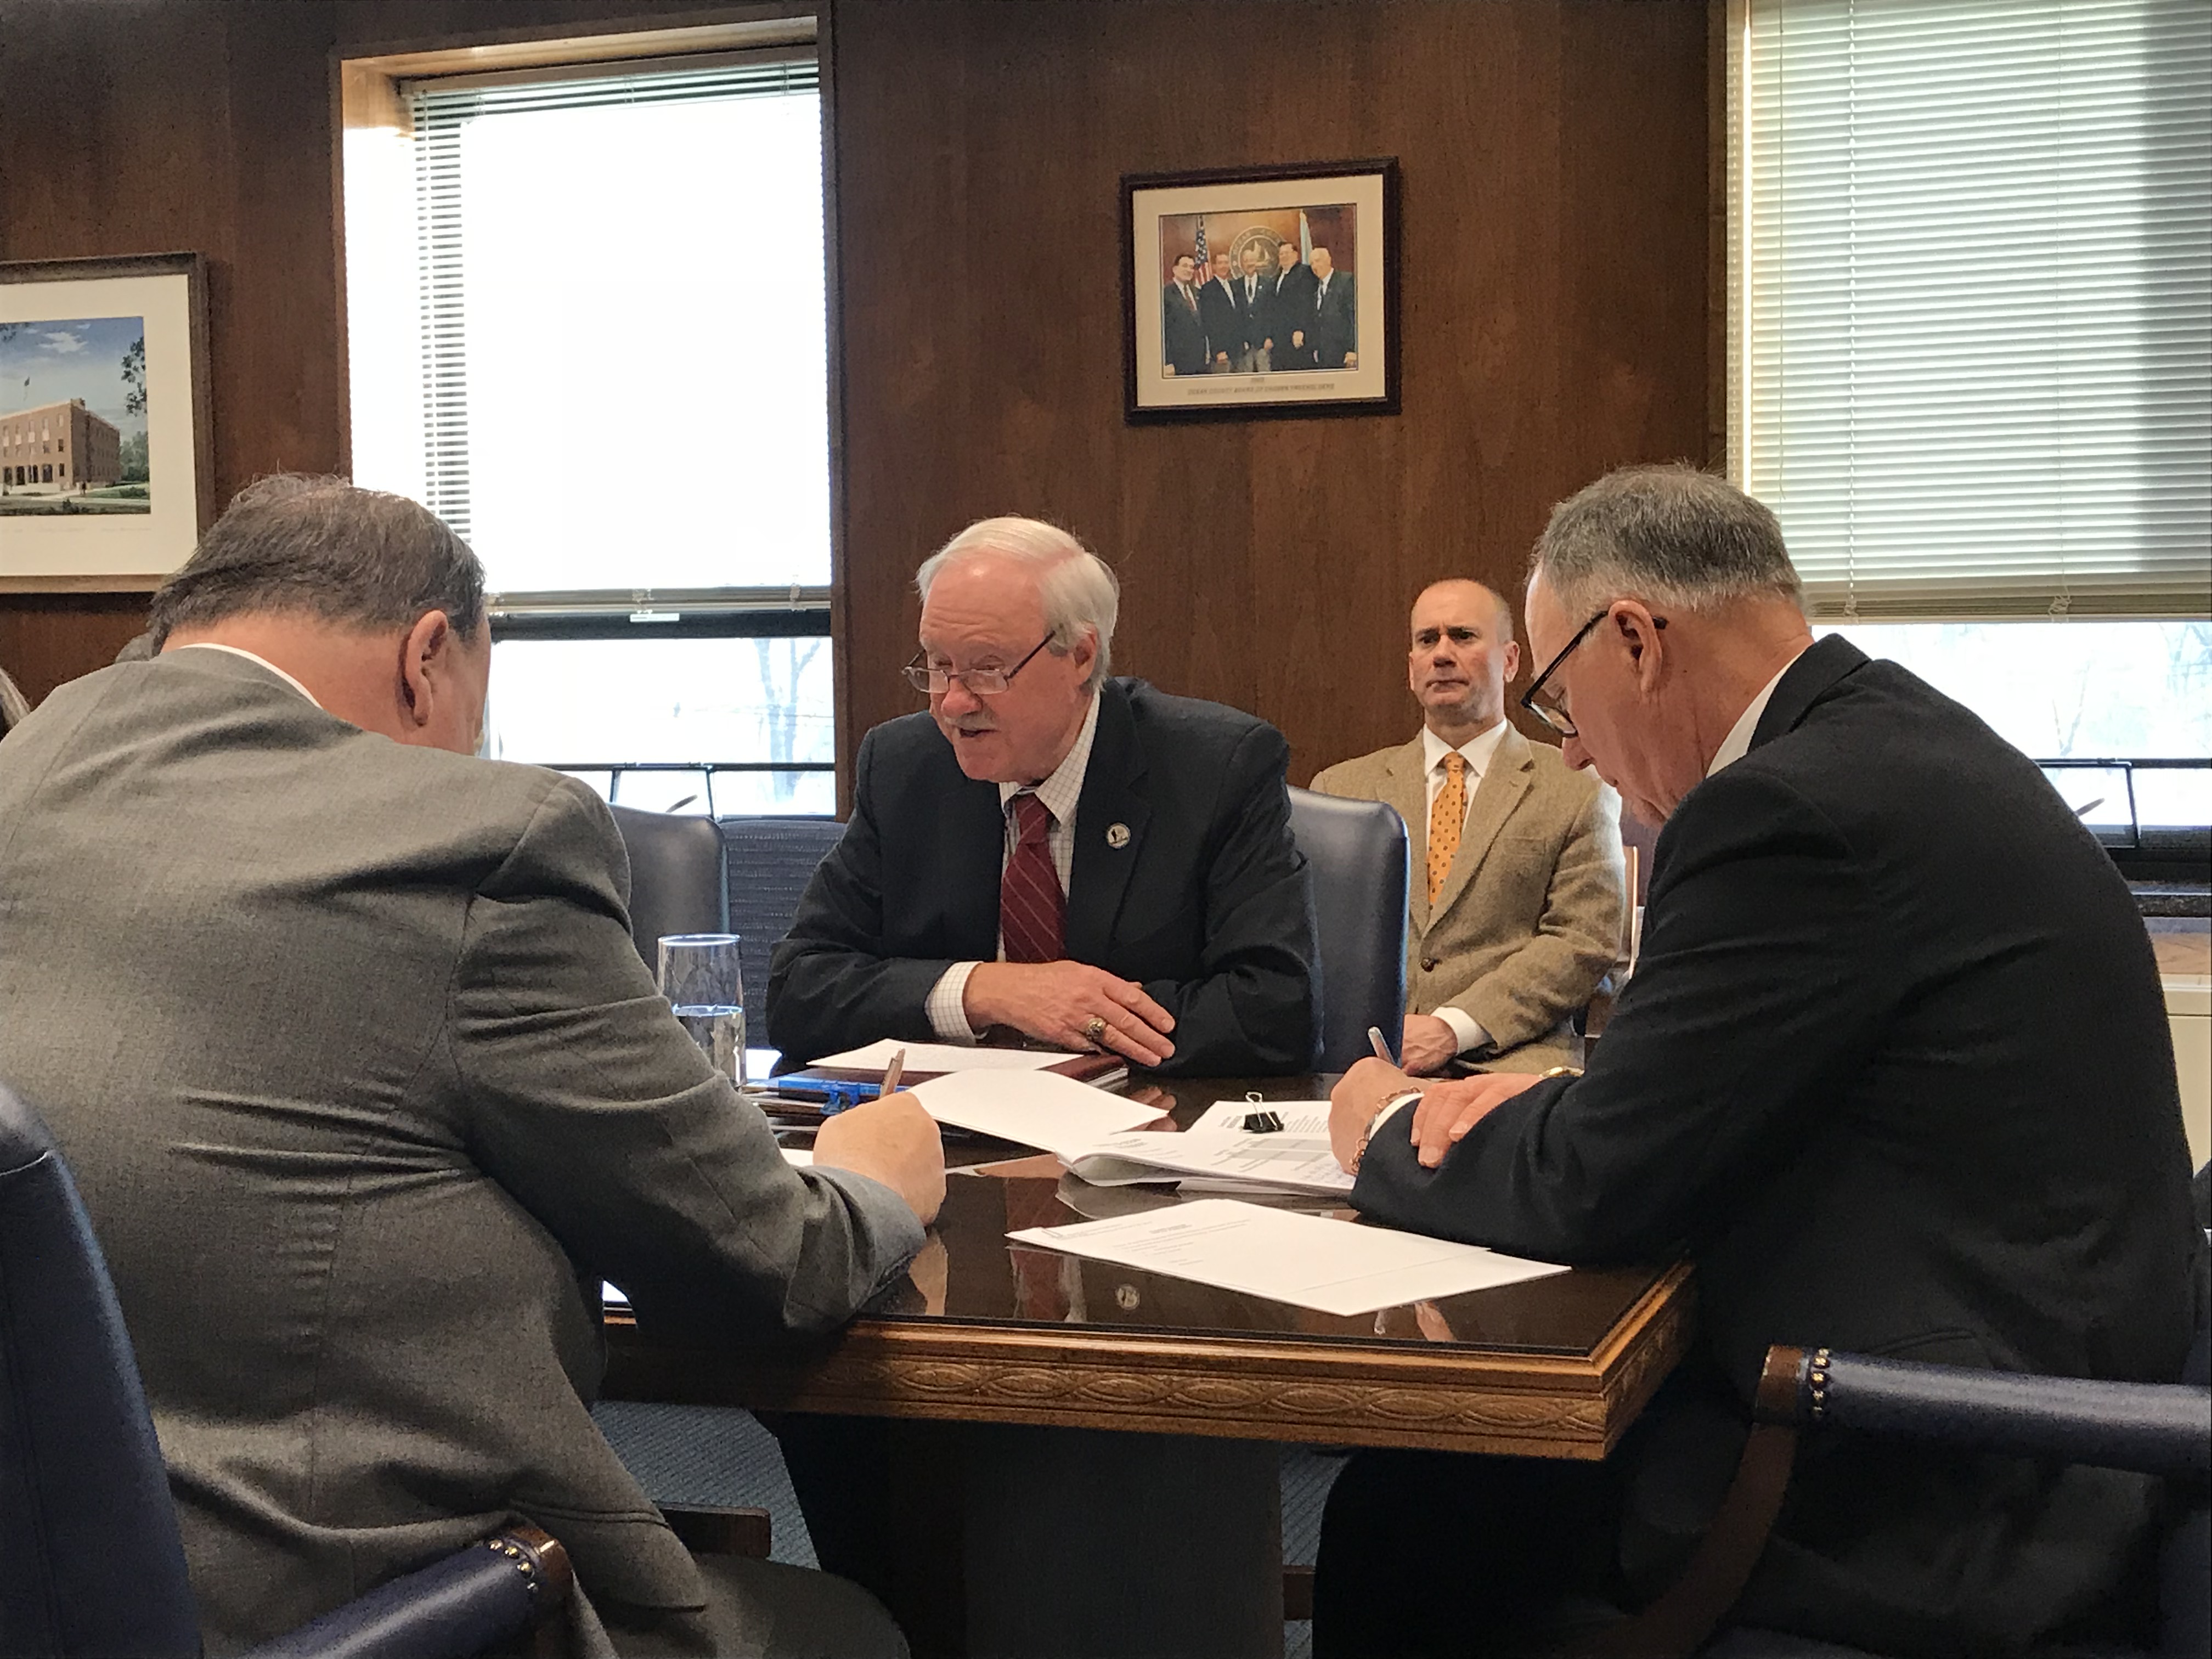 Freeholder John C. Bartlett (center) lead a discussion on the 2018 Ocean County budget. (Photo: Daniel Nee)